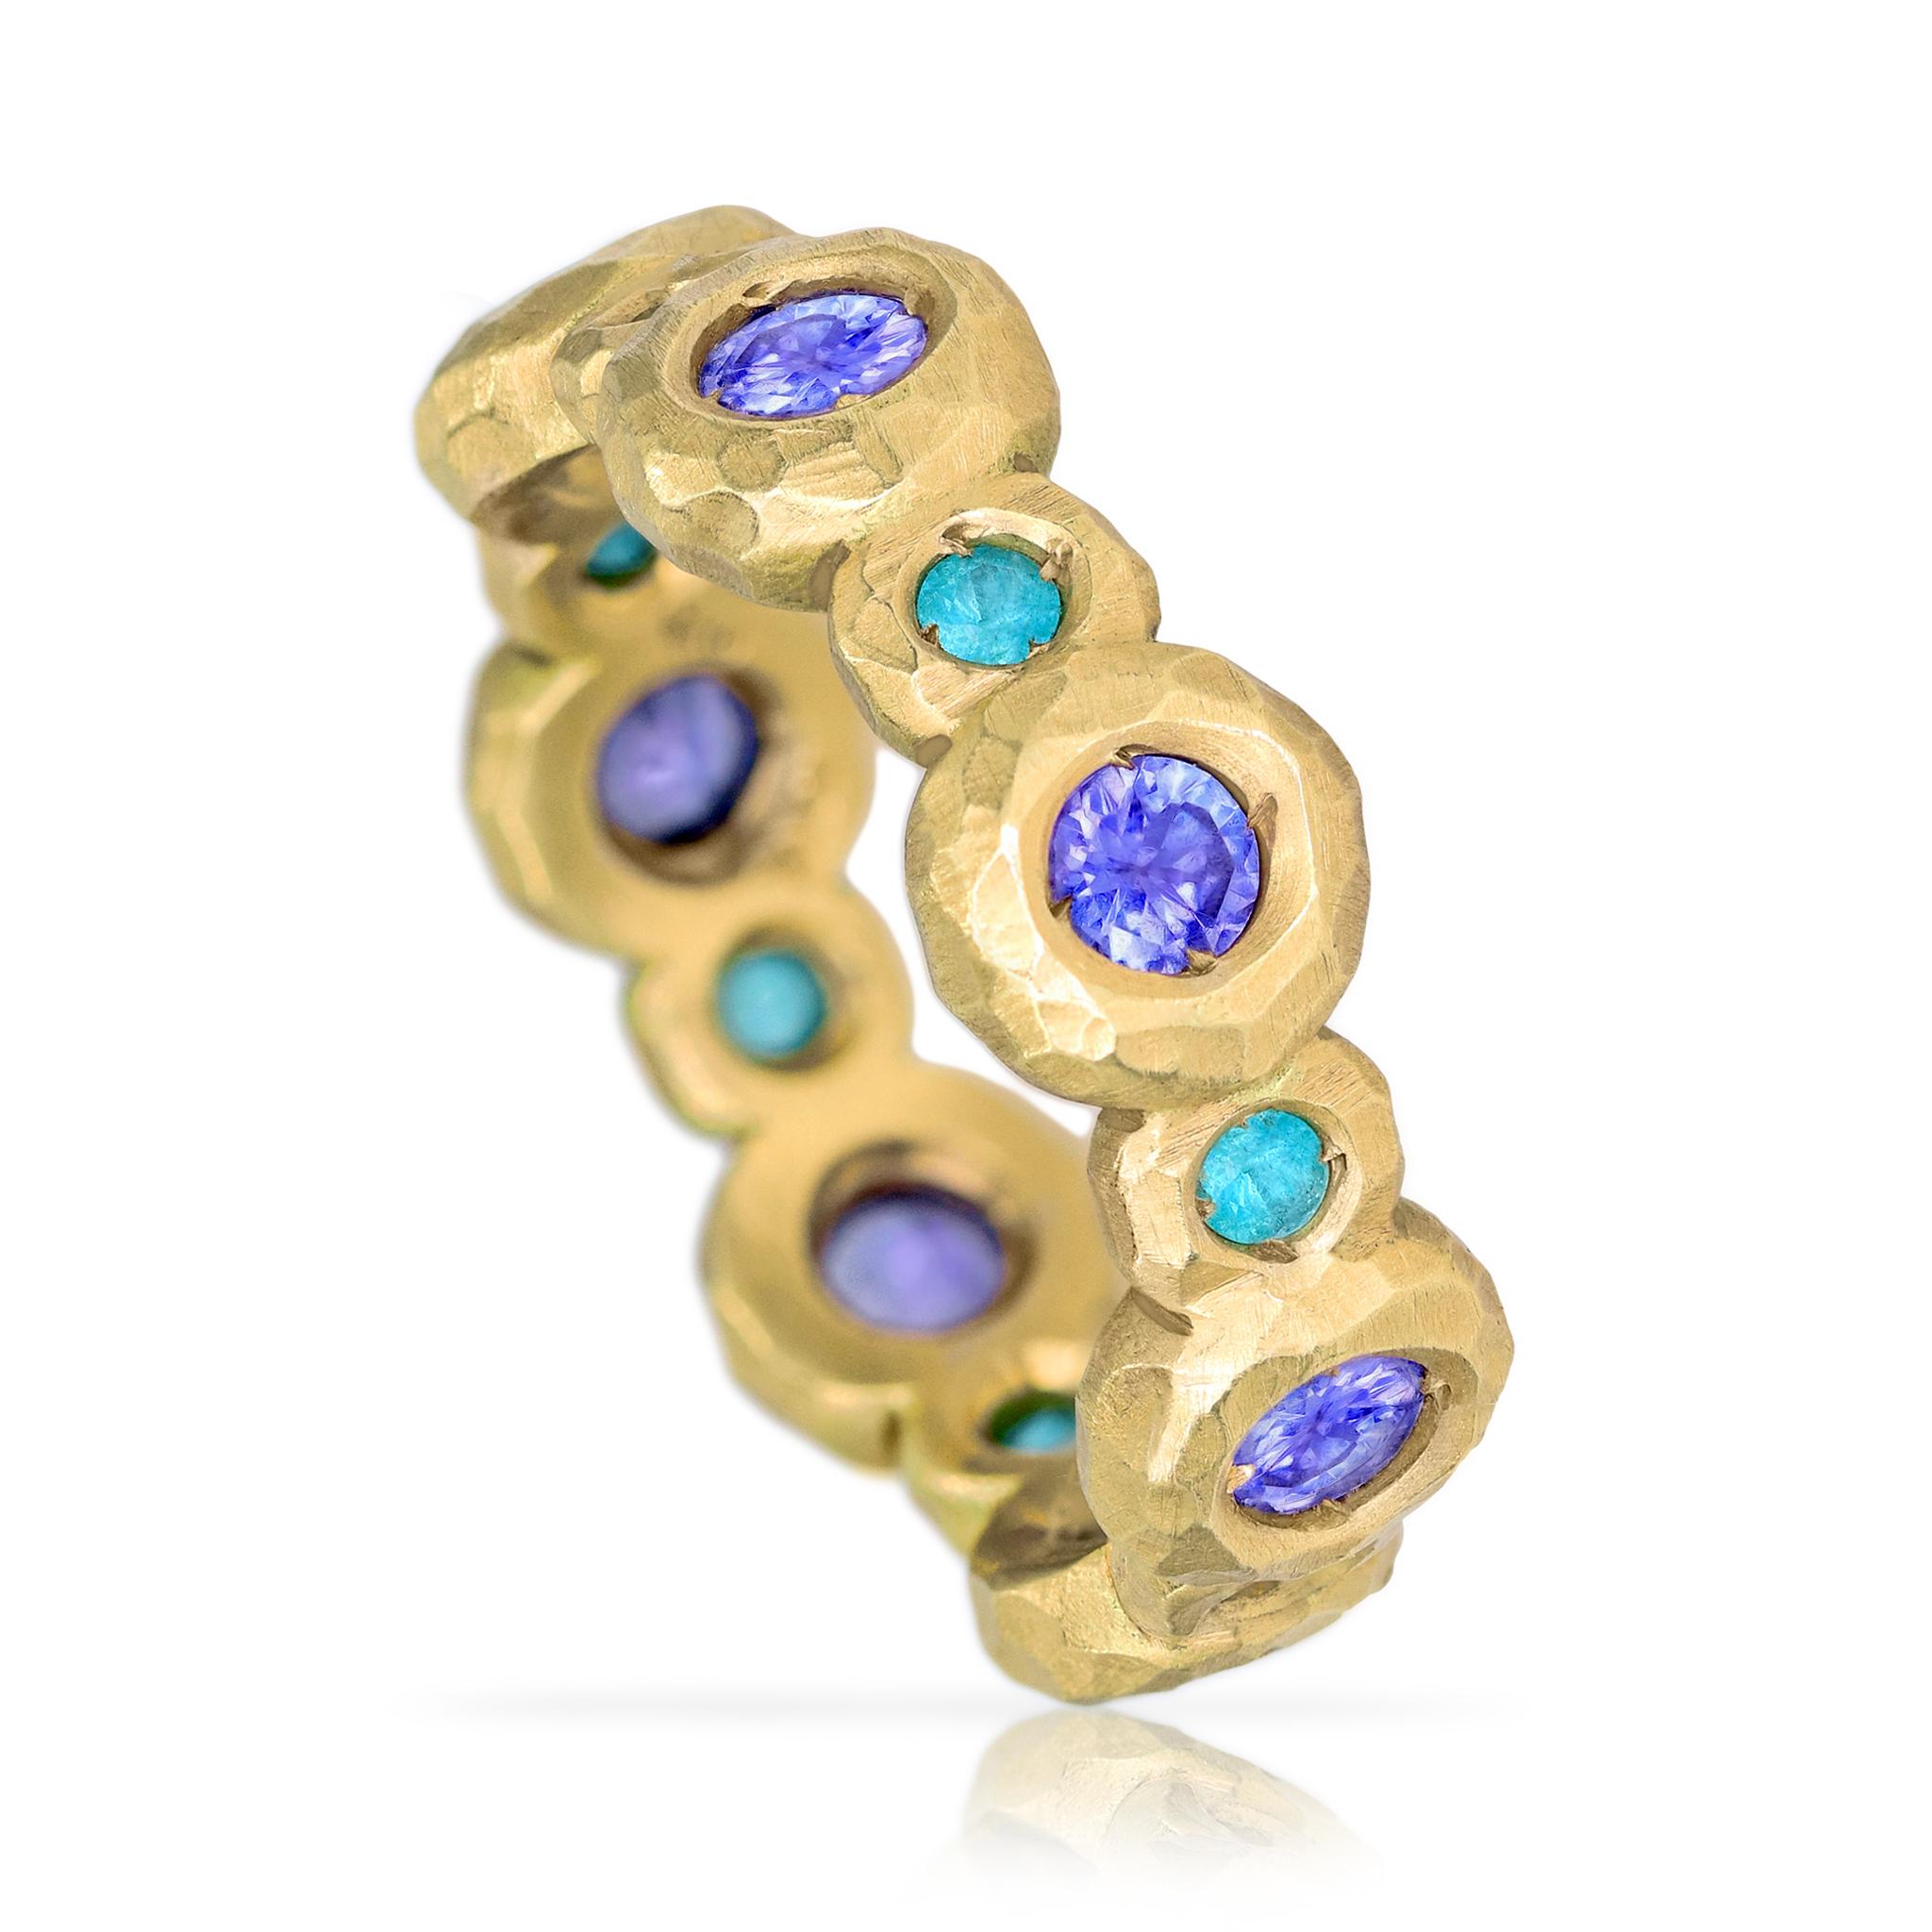 Tropical Crush Eternity Band Ring hand-fabricated by award winning jewelry designer Pamela Froman in her signature, intricately-finished 18k yellow gold featuring gorgeous alternating faceted round Paraiba tourmaline and tanzanite, both precious and